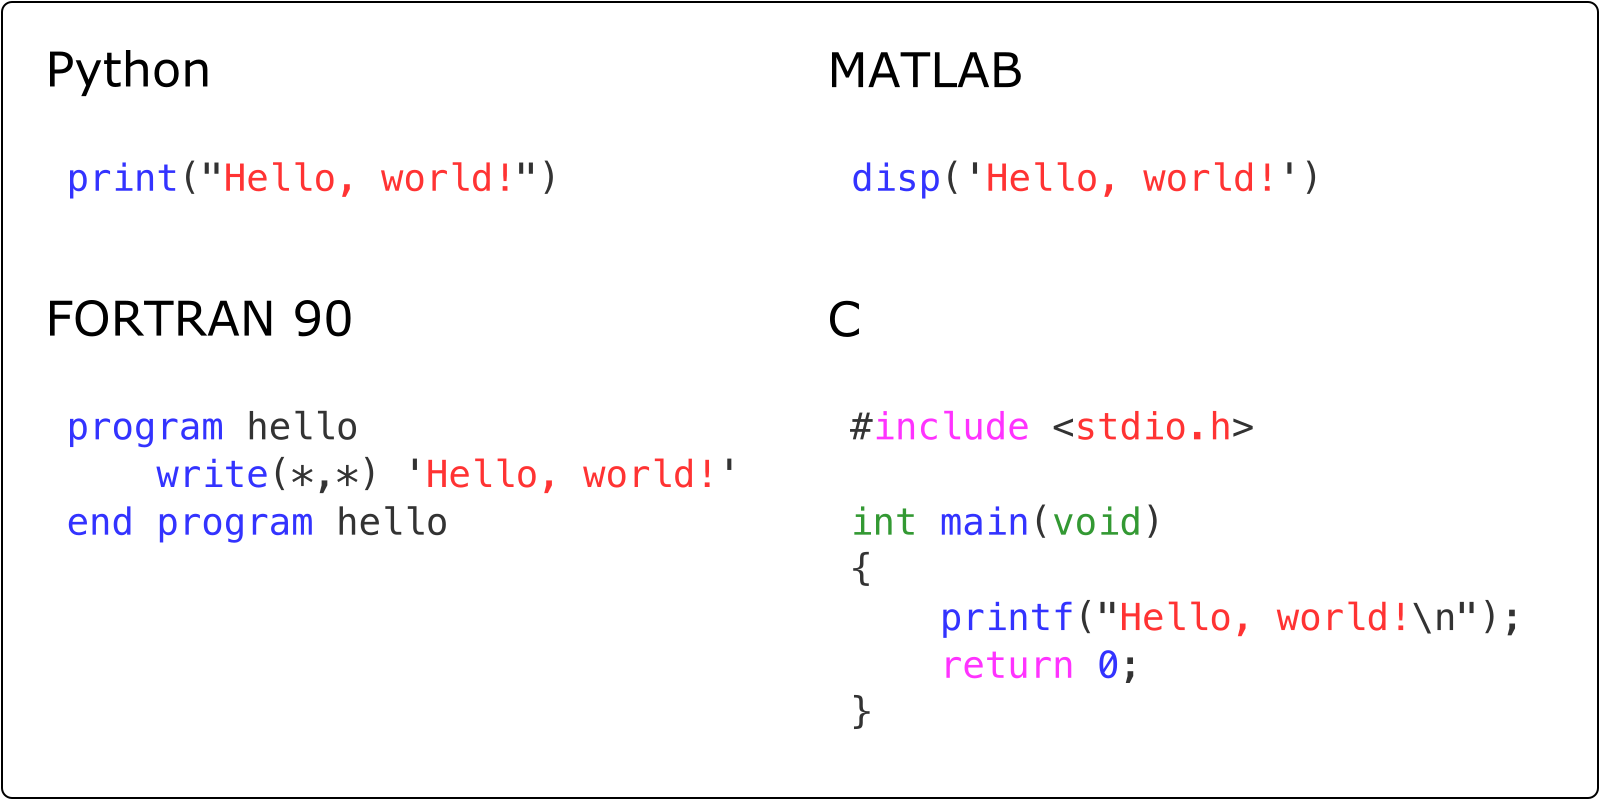 Figure 1.7. Examples of printing "Hello, world!" in different programming languages.